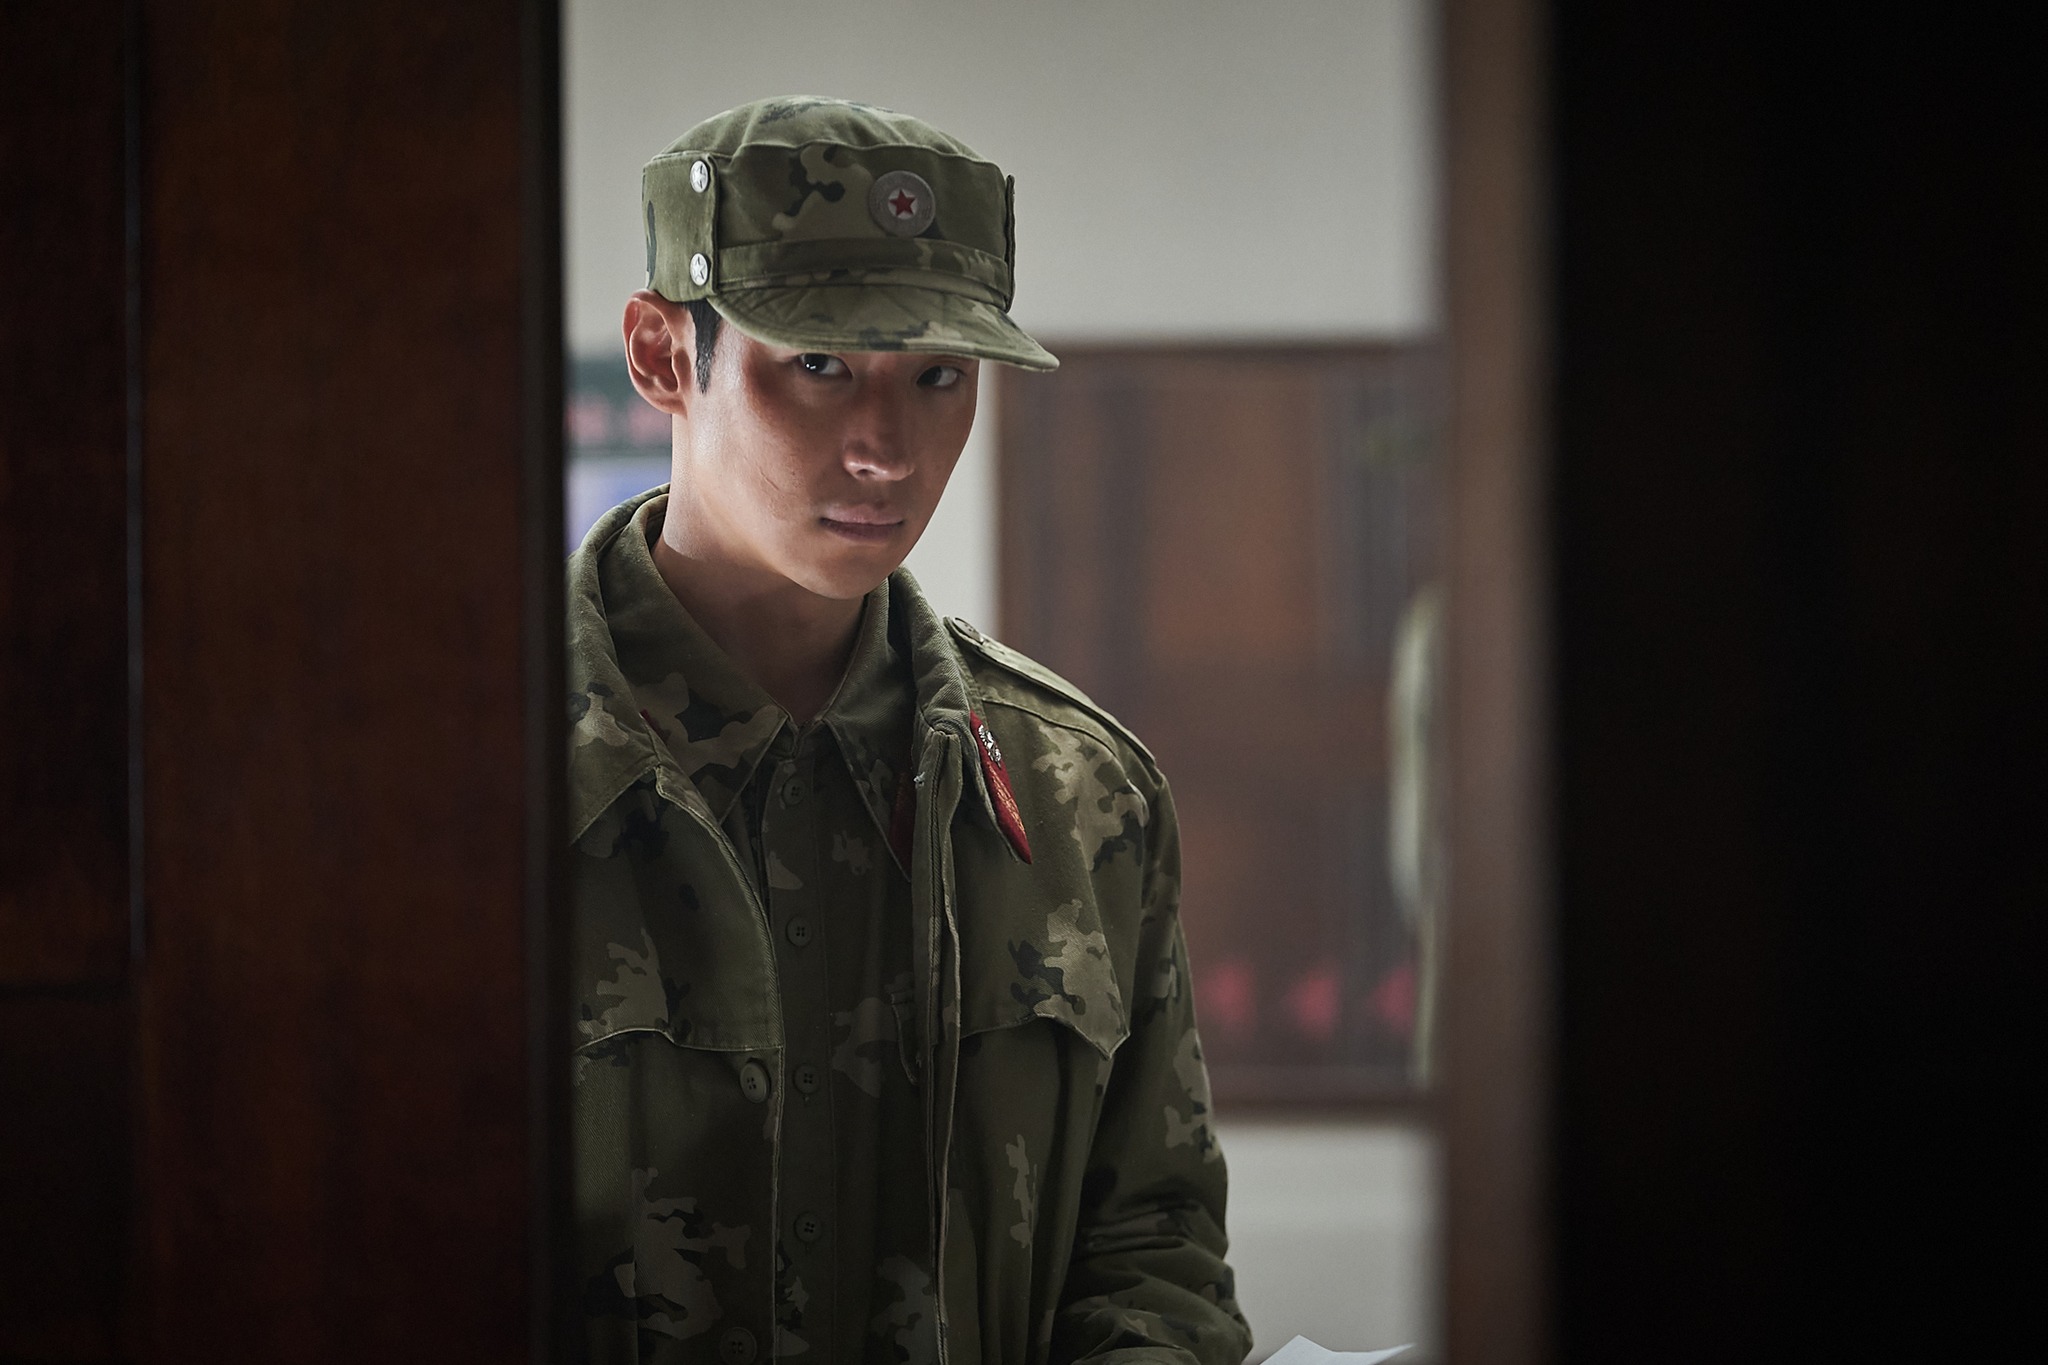 Koo Kyo Hwan Is Determined To Catch Lee Je Hoon With Any Means Necessary In Upcoming Film “Escape”